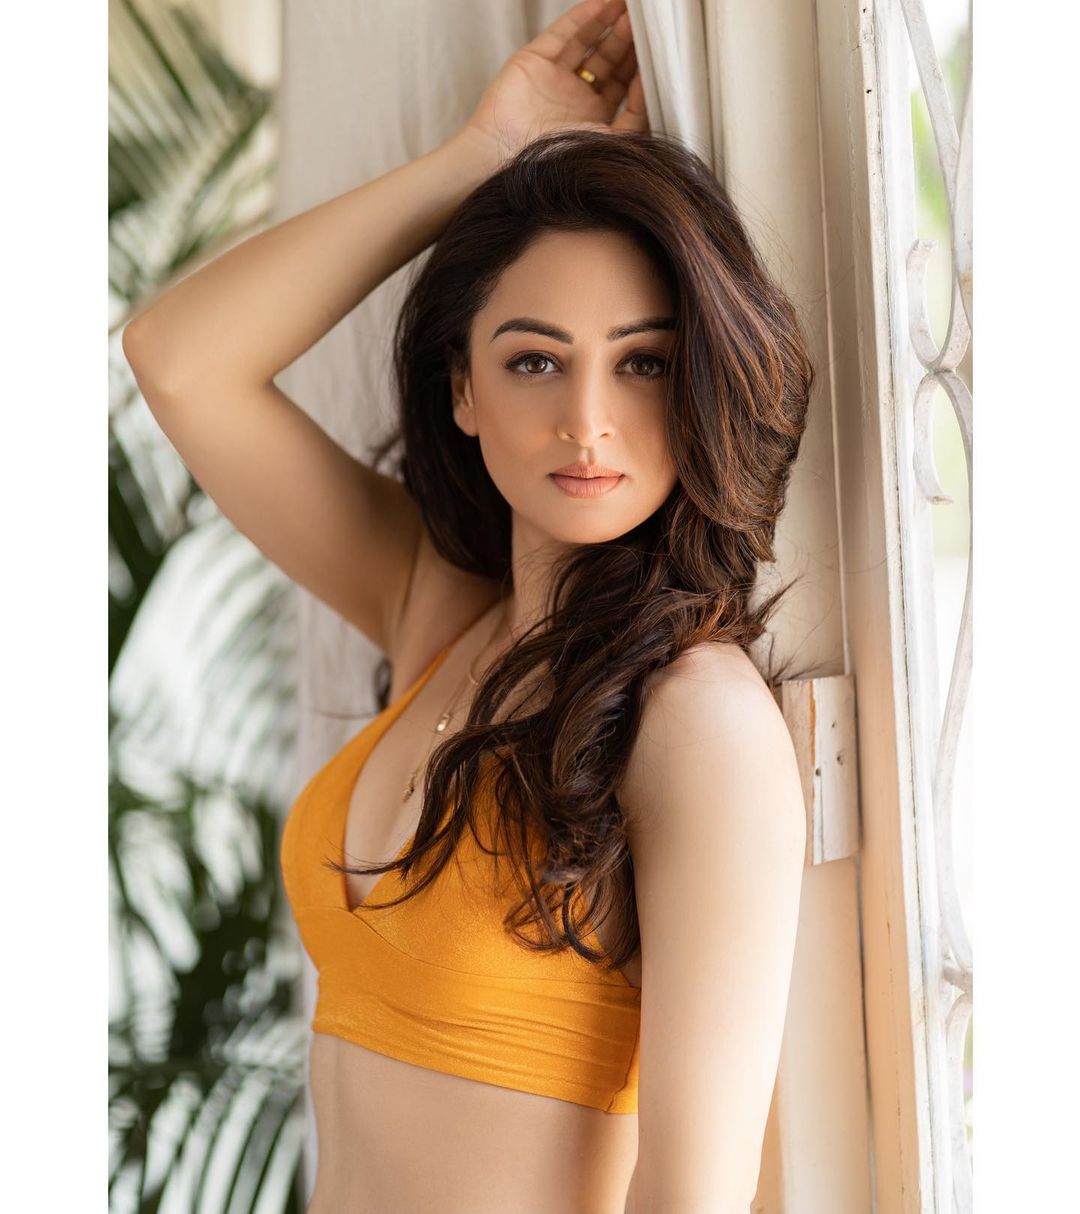 Sandeepa Dhar oozes sexiness in the yellow crop top.